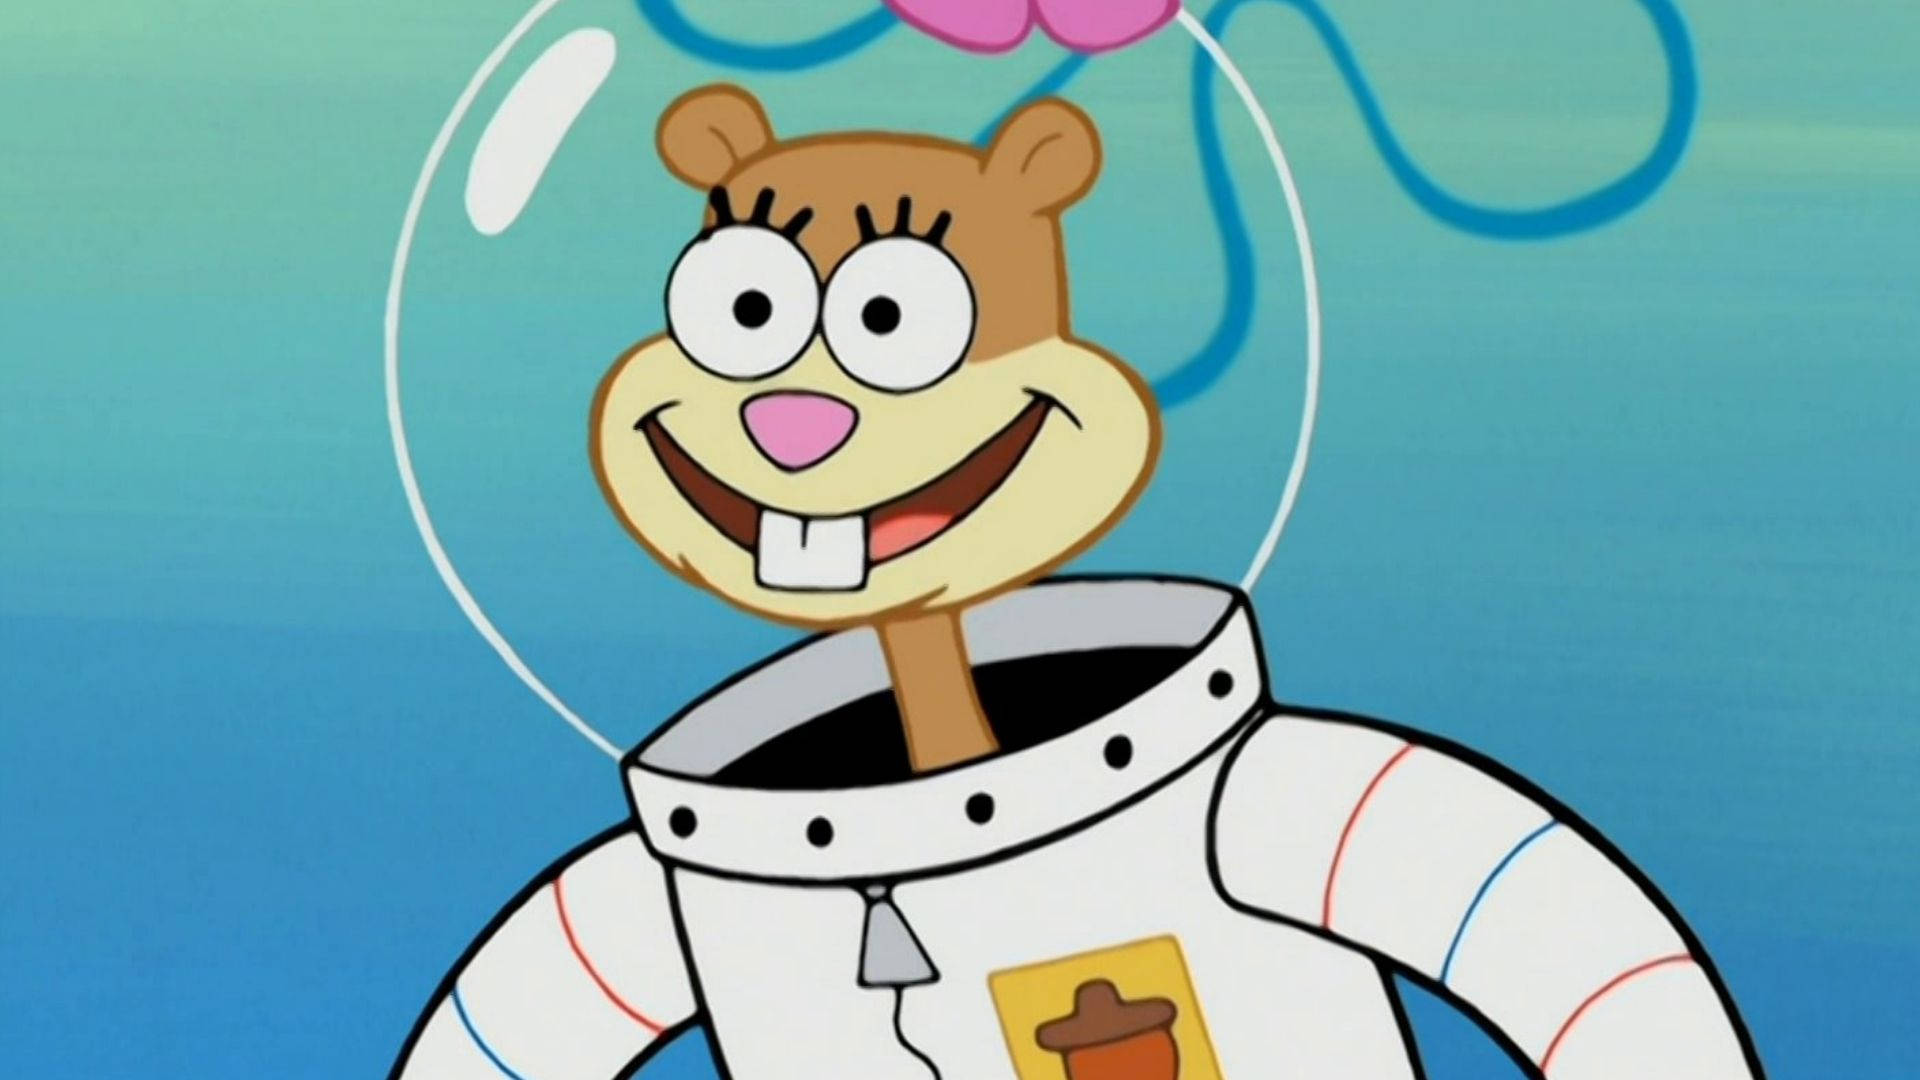 Sandy Cheeks Great Smile Background